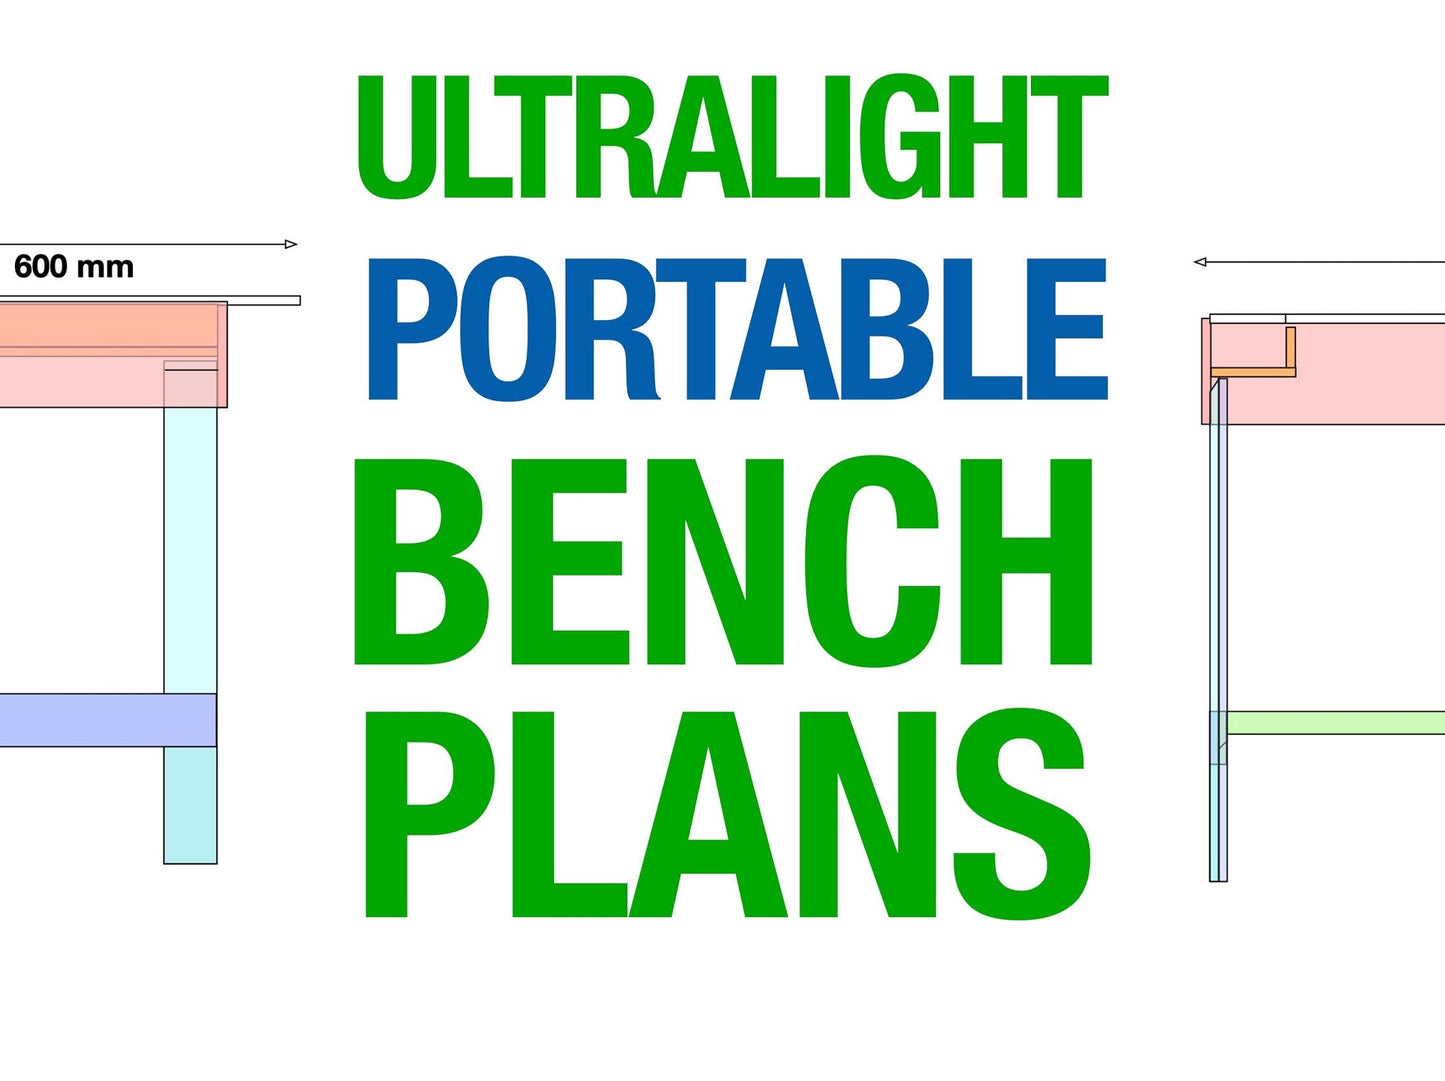 Ultralight Portable Bench plans - for benches made from 12mm thick material